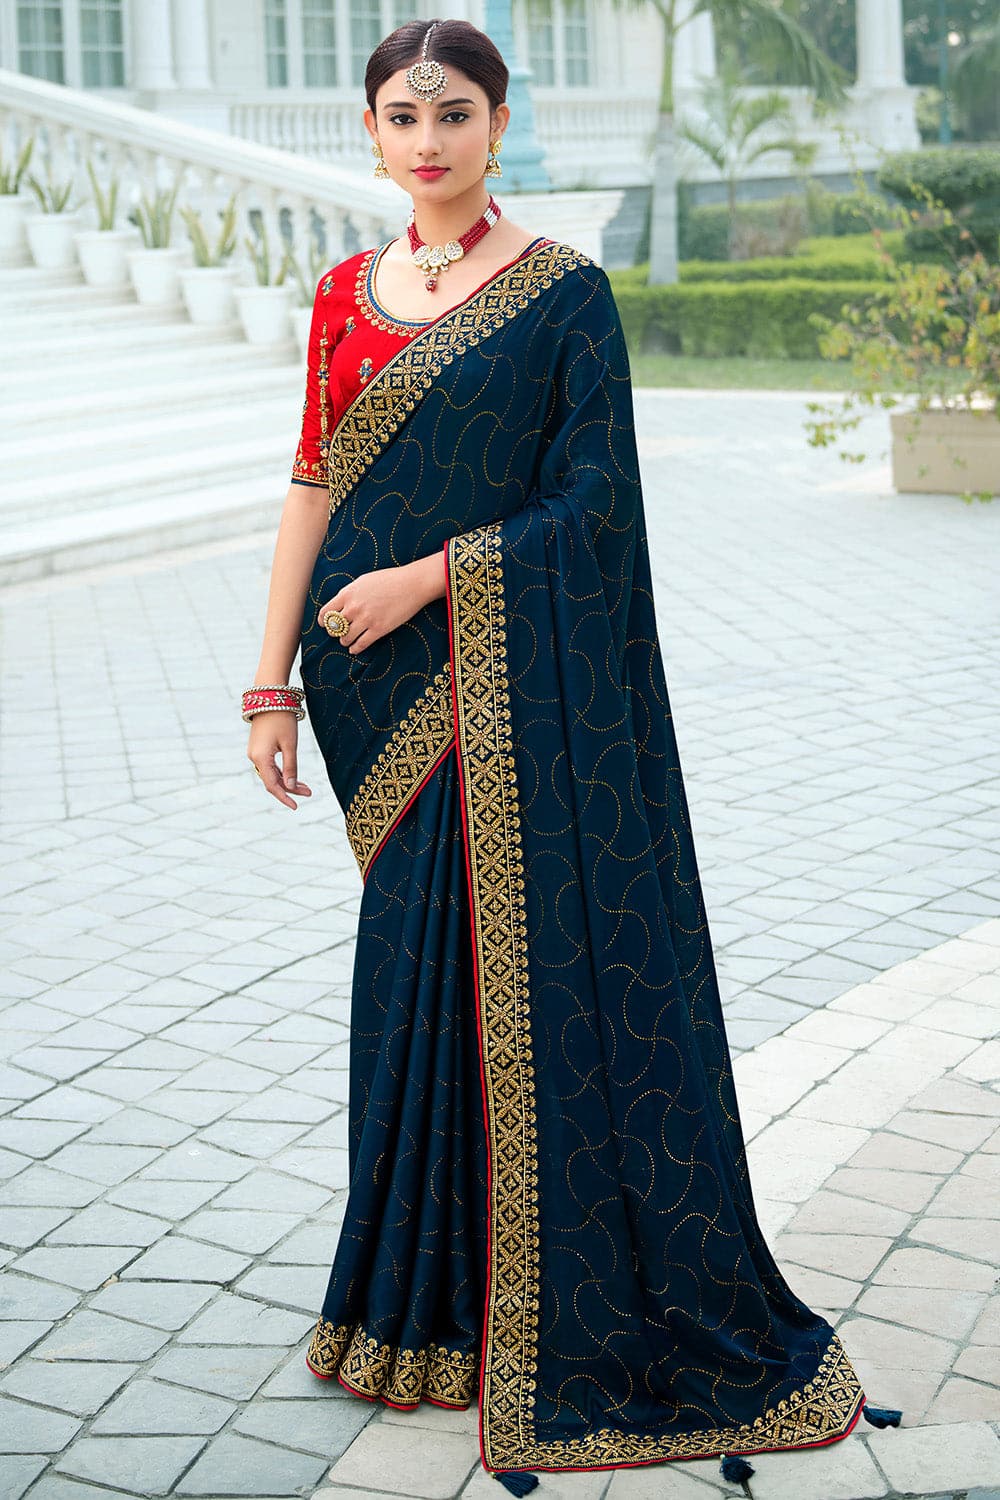 Buy 38/S-2 Size Black Chiffon Sarees Online for Women in USA